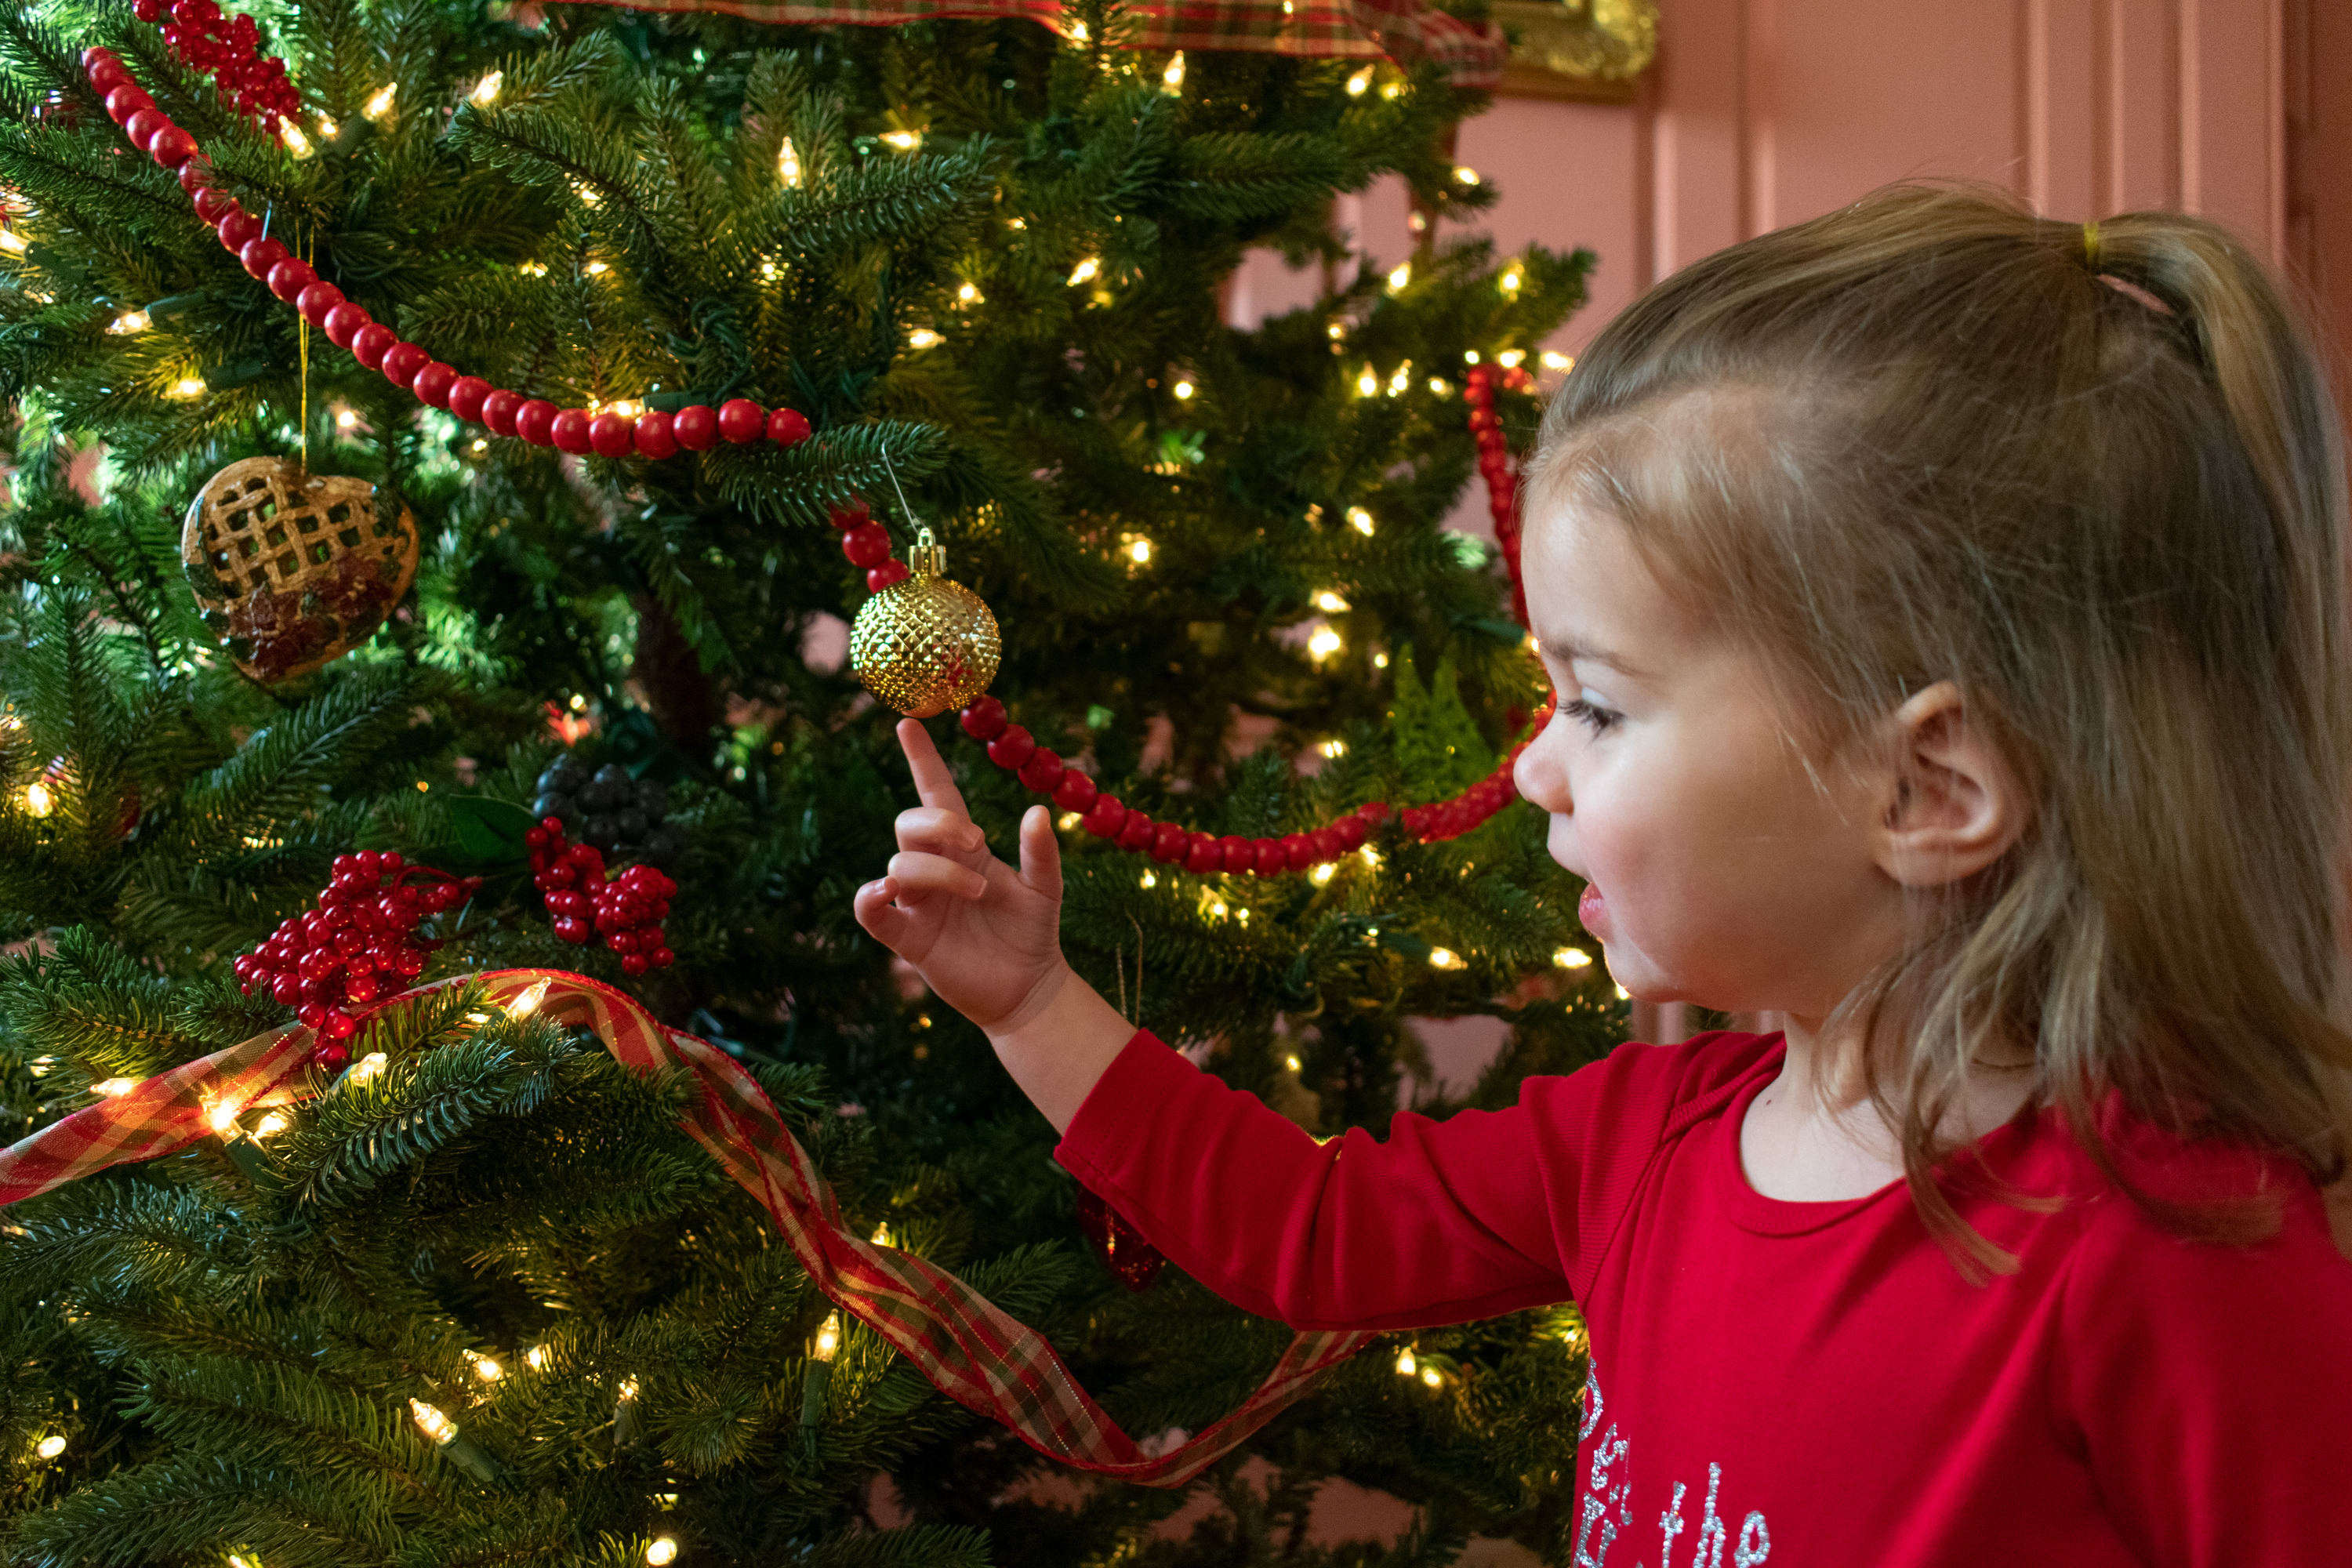 A little girl points to an ornament on a Christmas tree.